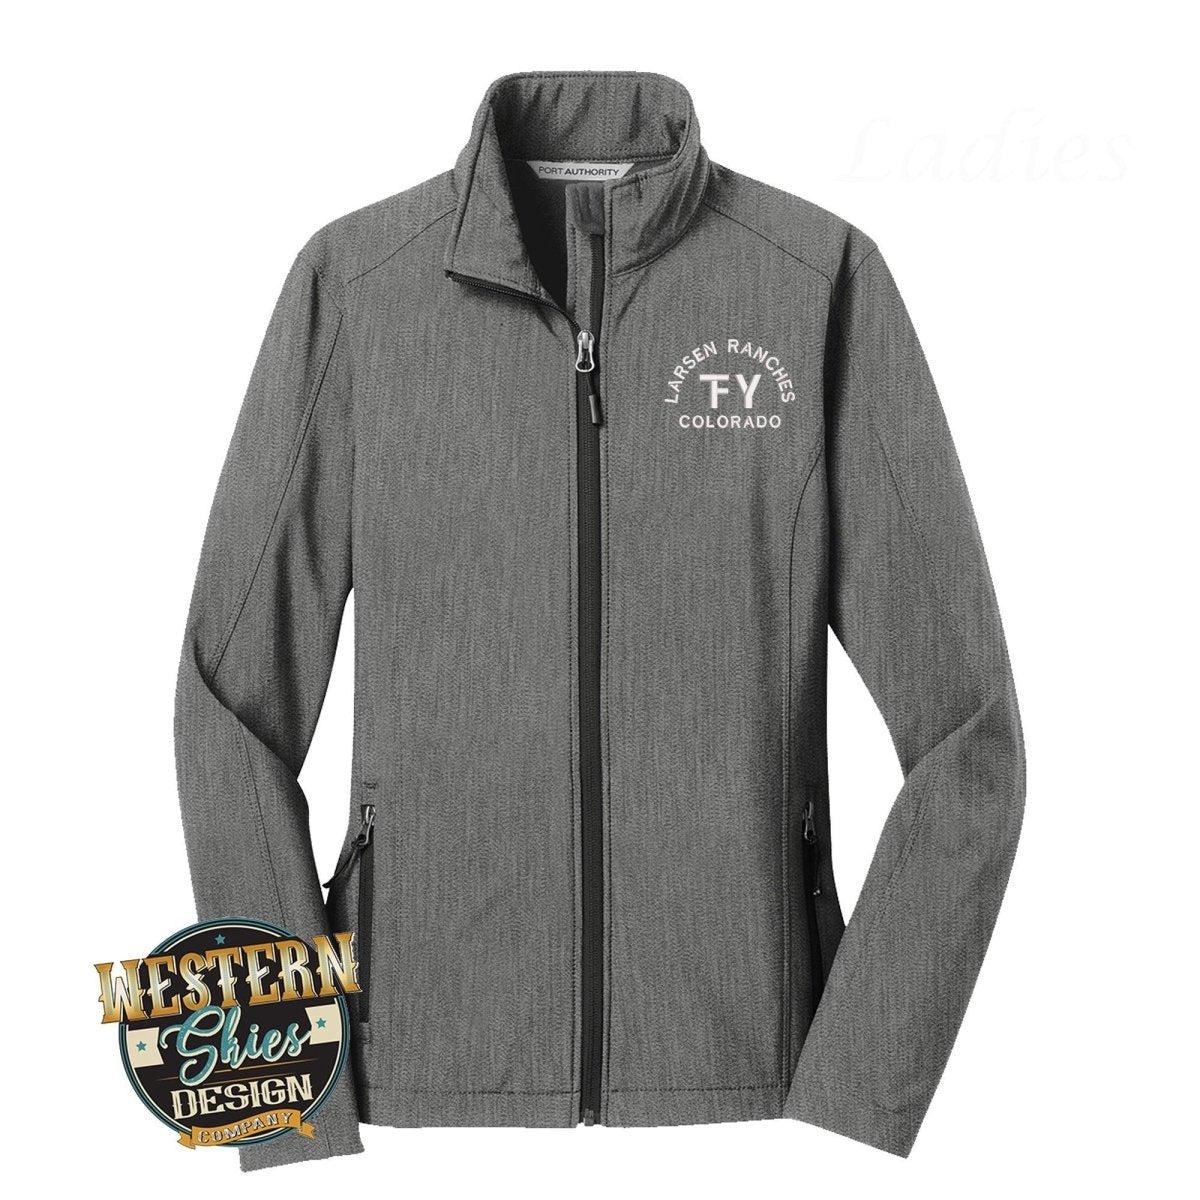 Port Authority® Ladies Core Soft Shell Jacket - Western Skies Design Company